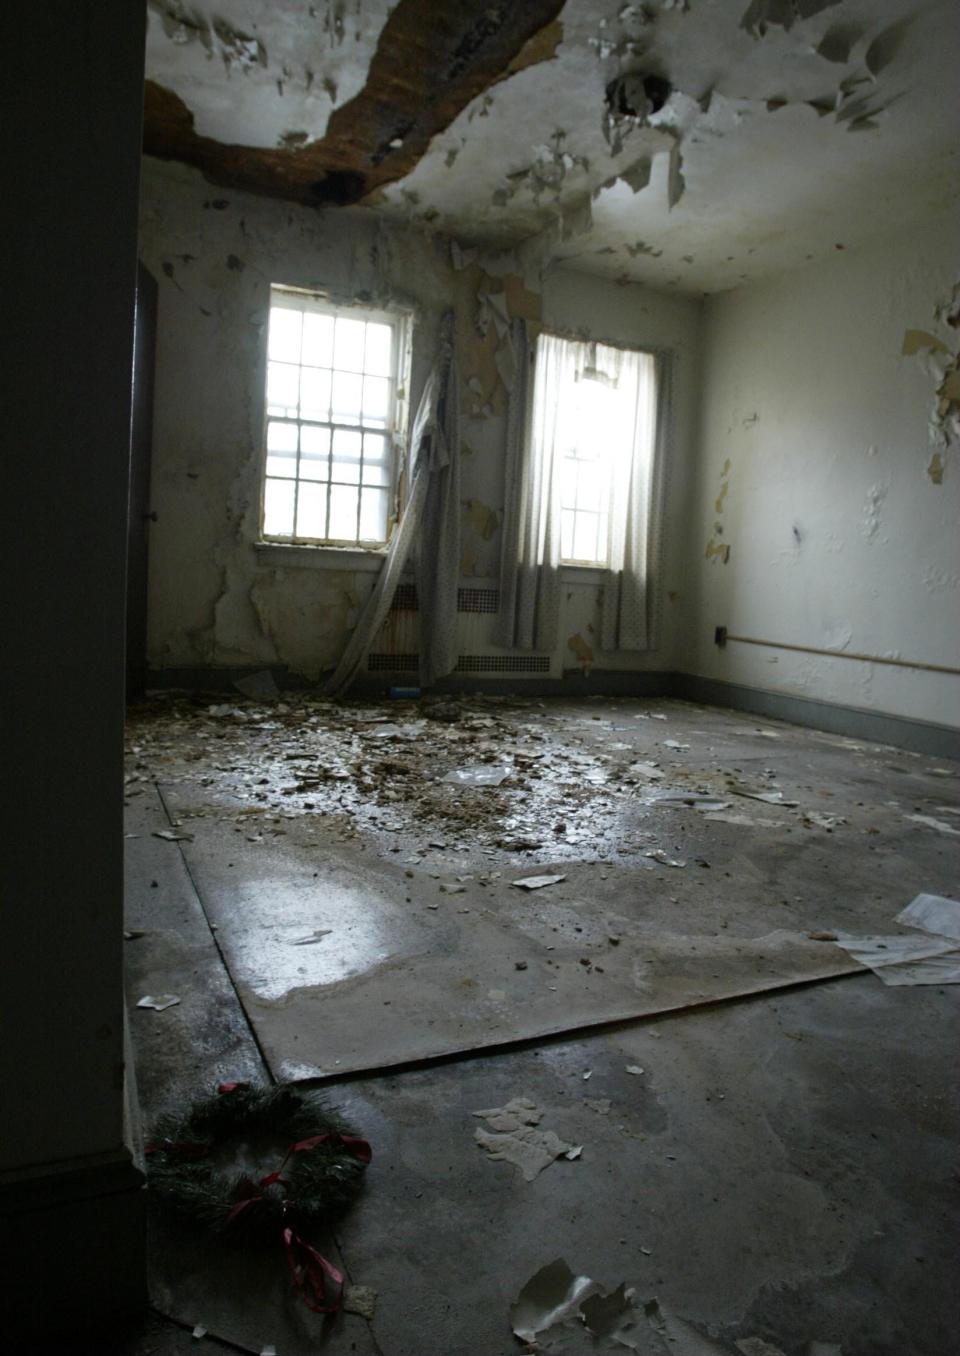 One of the rooms inside what used to be the main building at Marlboro Psychiatric Hospital, seen in 2009, a few years before the abandoned institution was torn down.